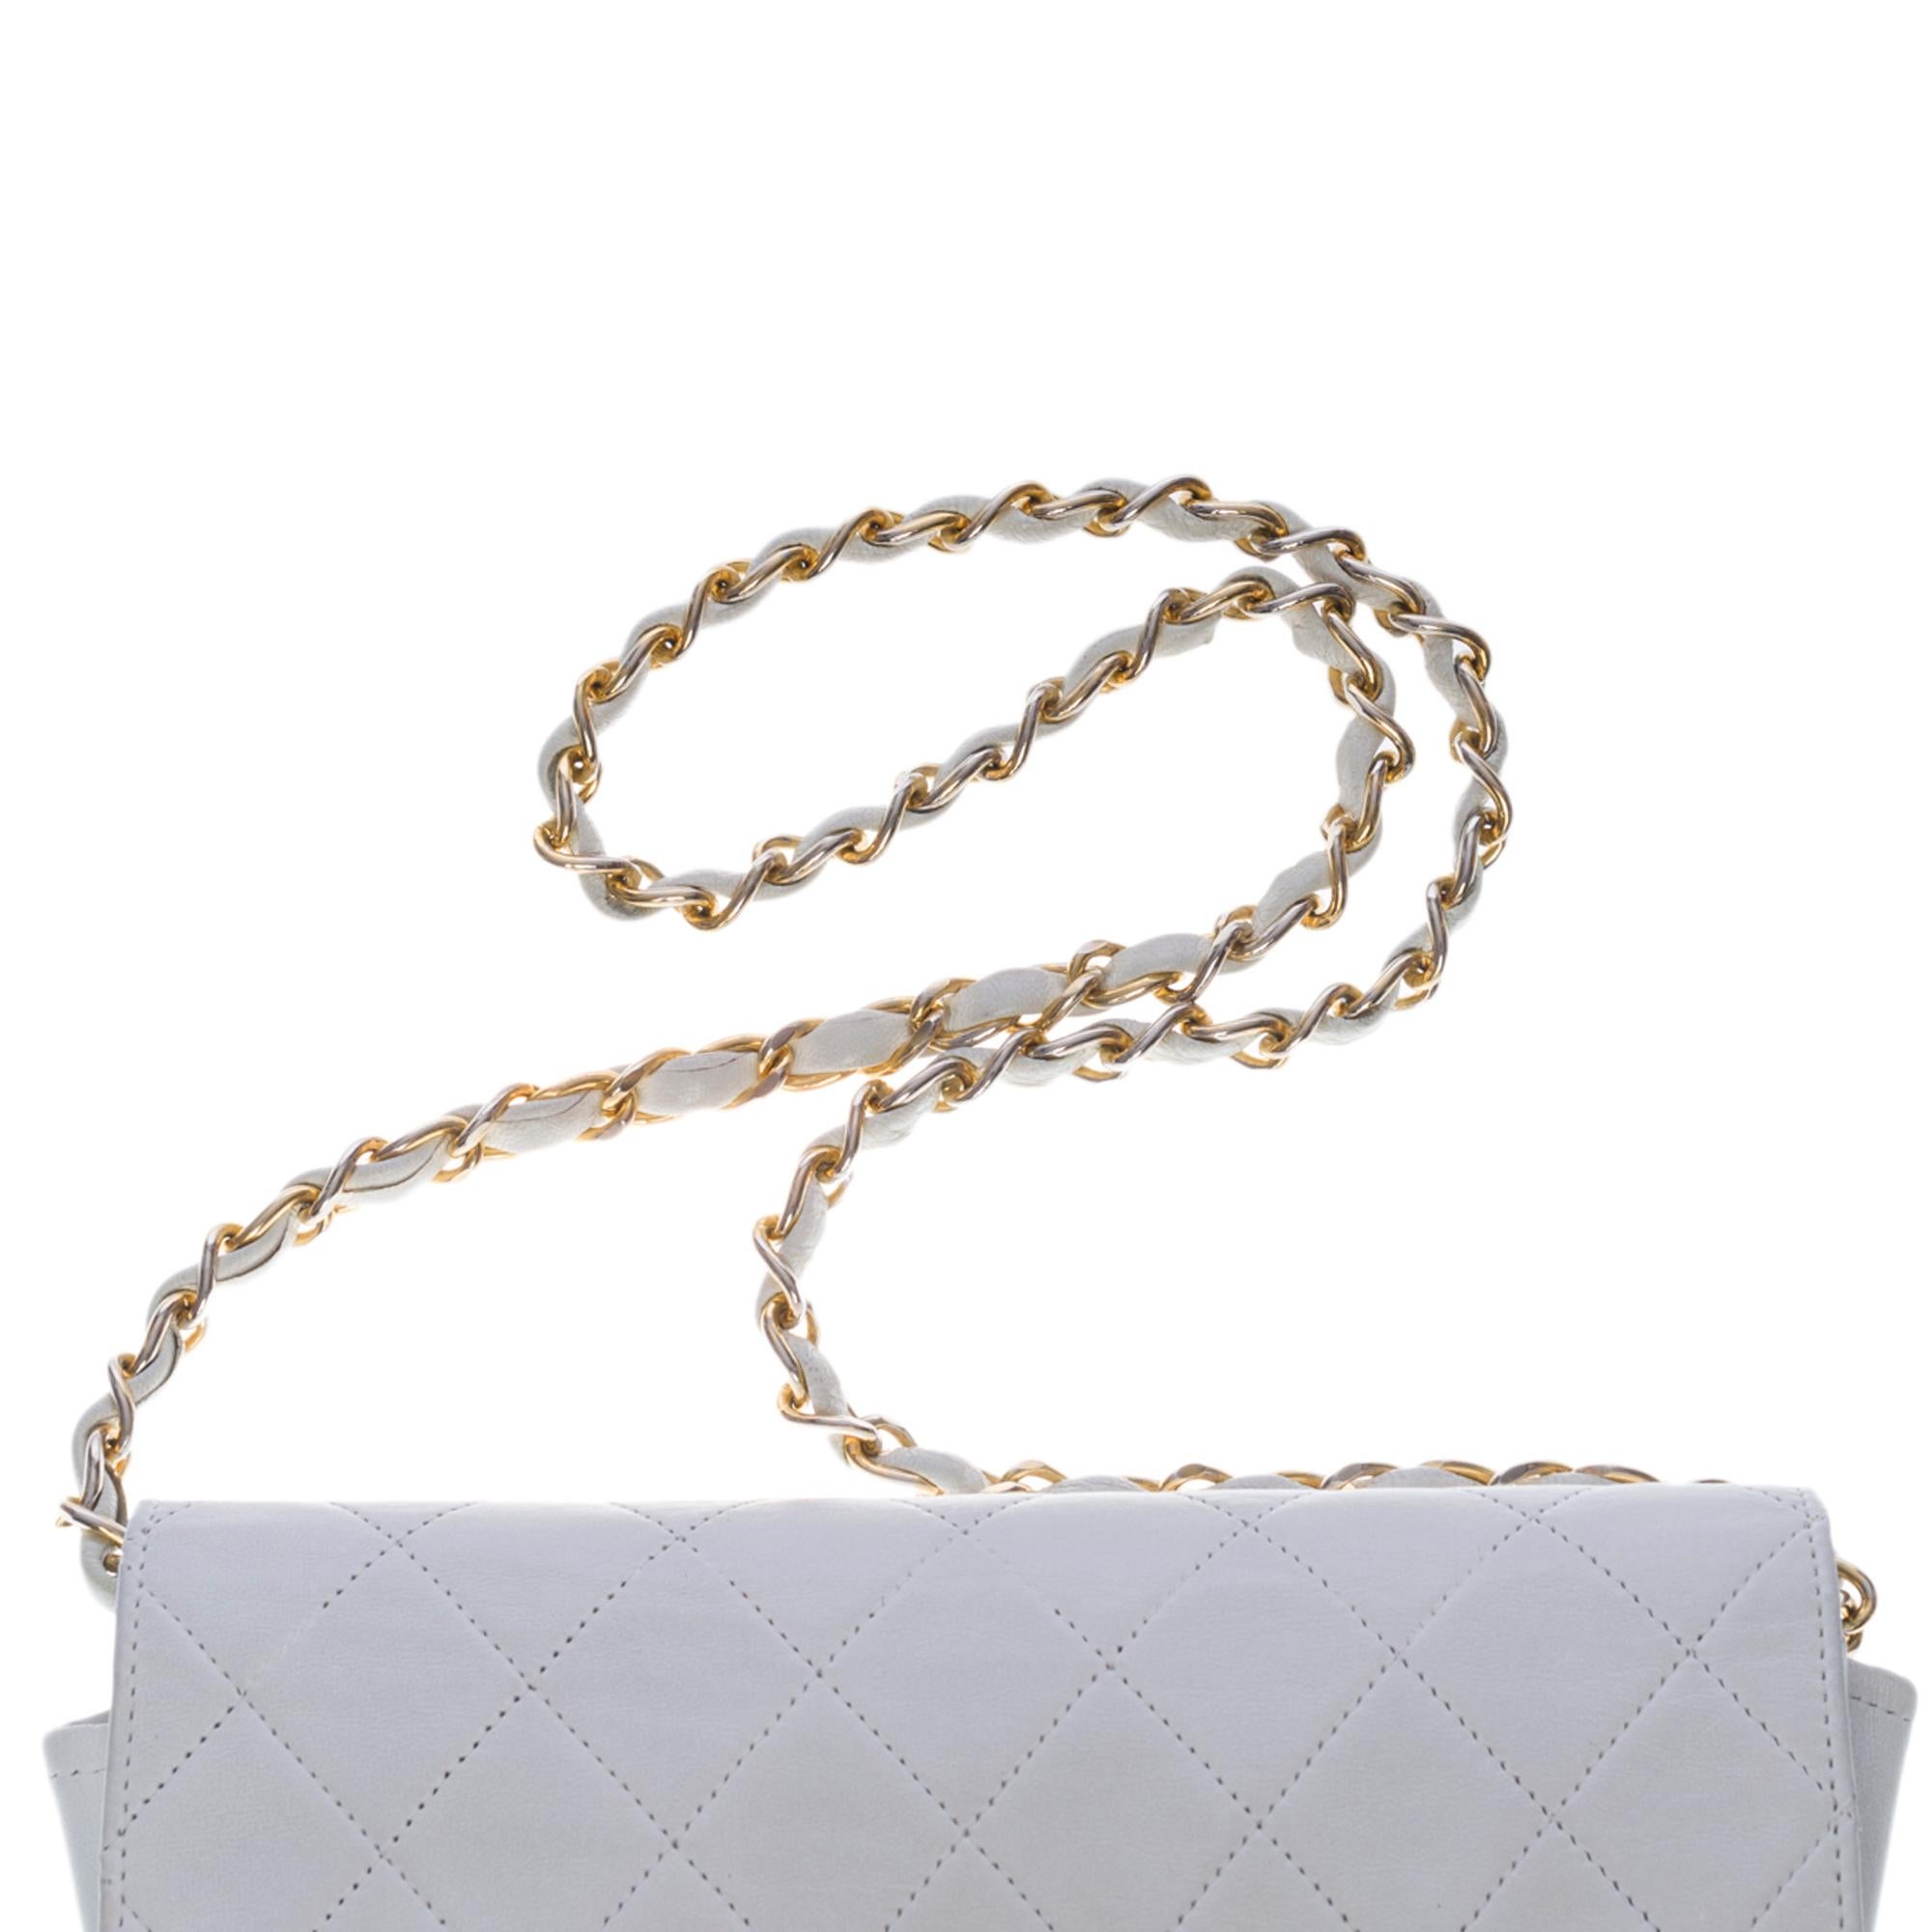 Chanel Full flap Mini shoulder bag in white quilted lambskin, GHW 2